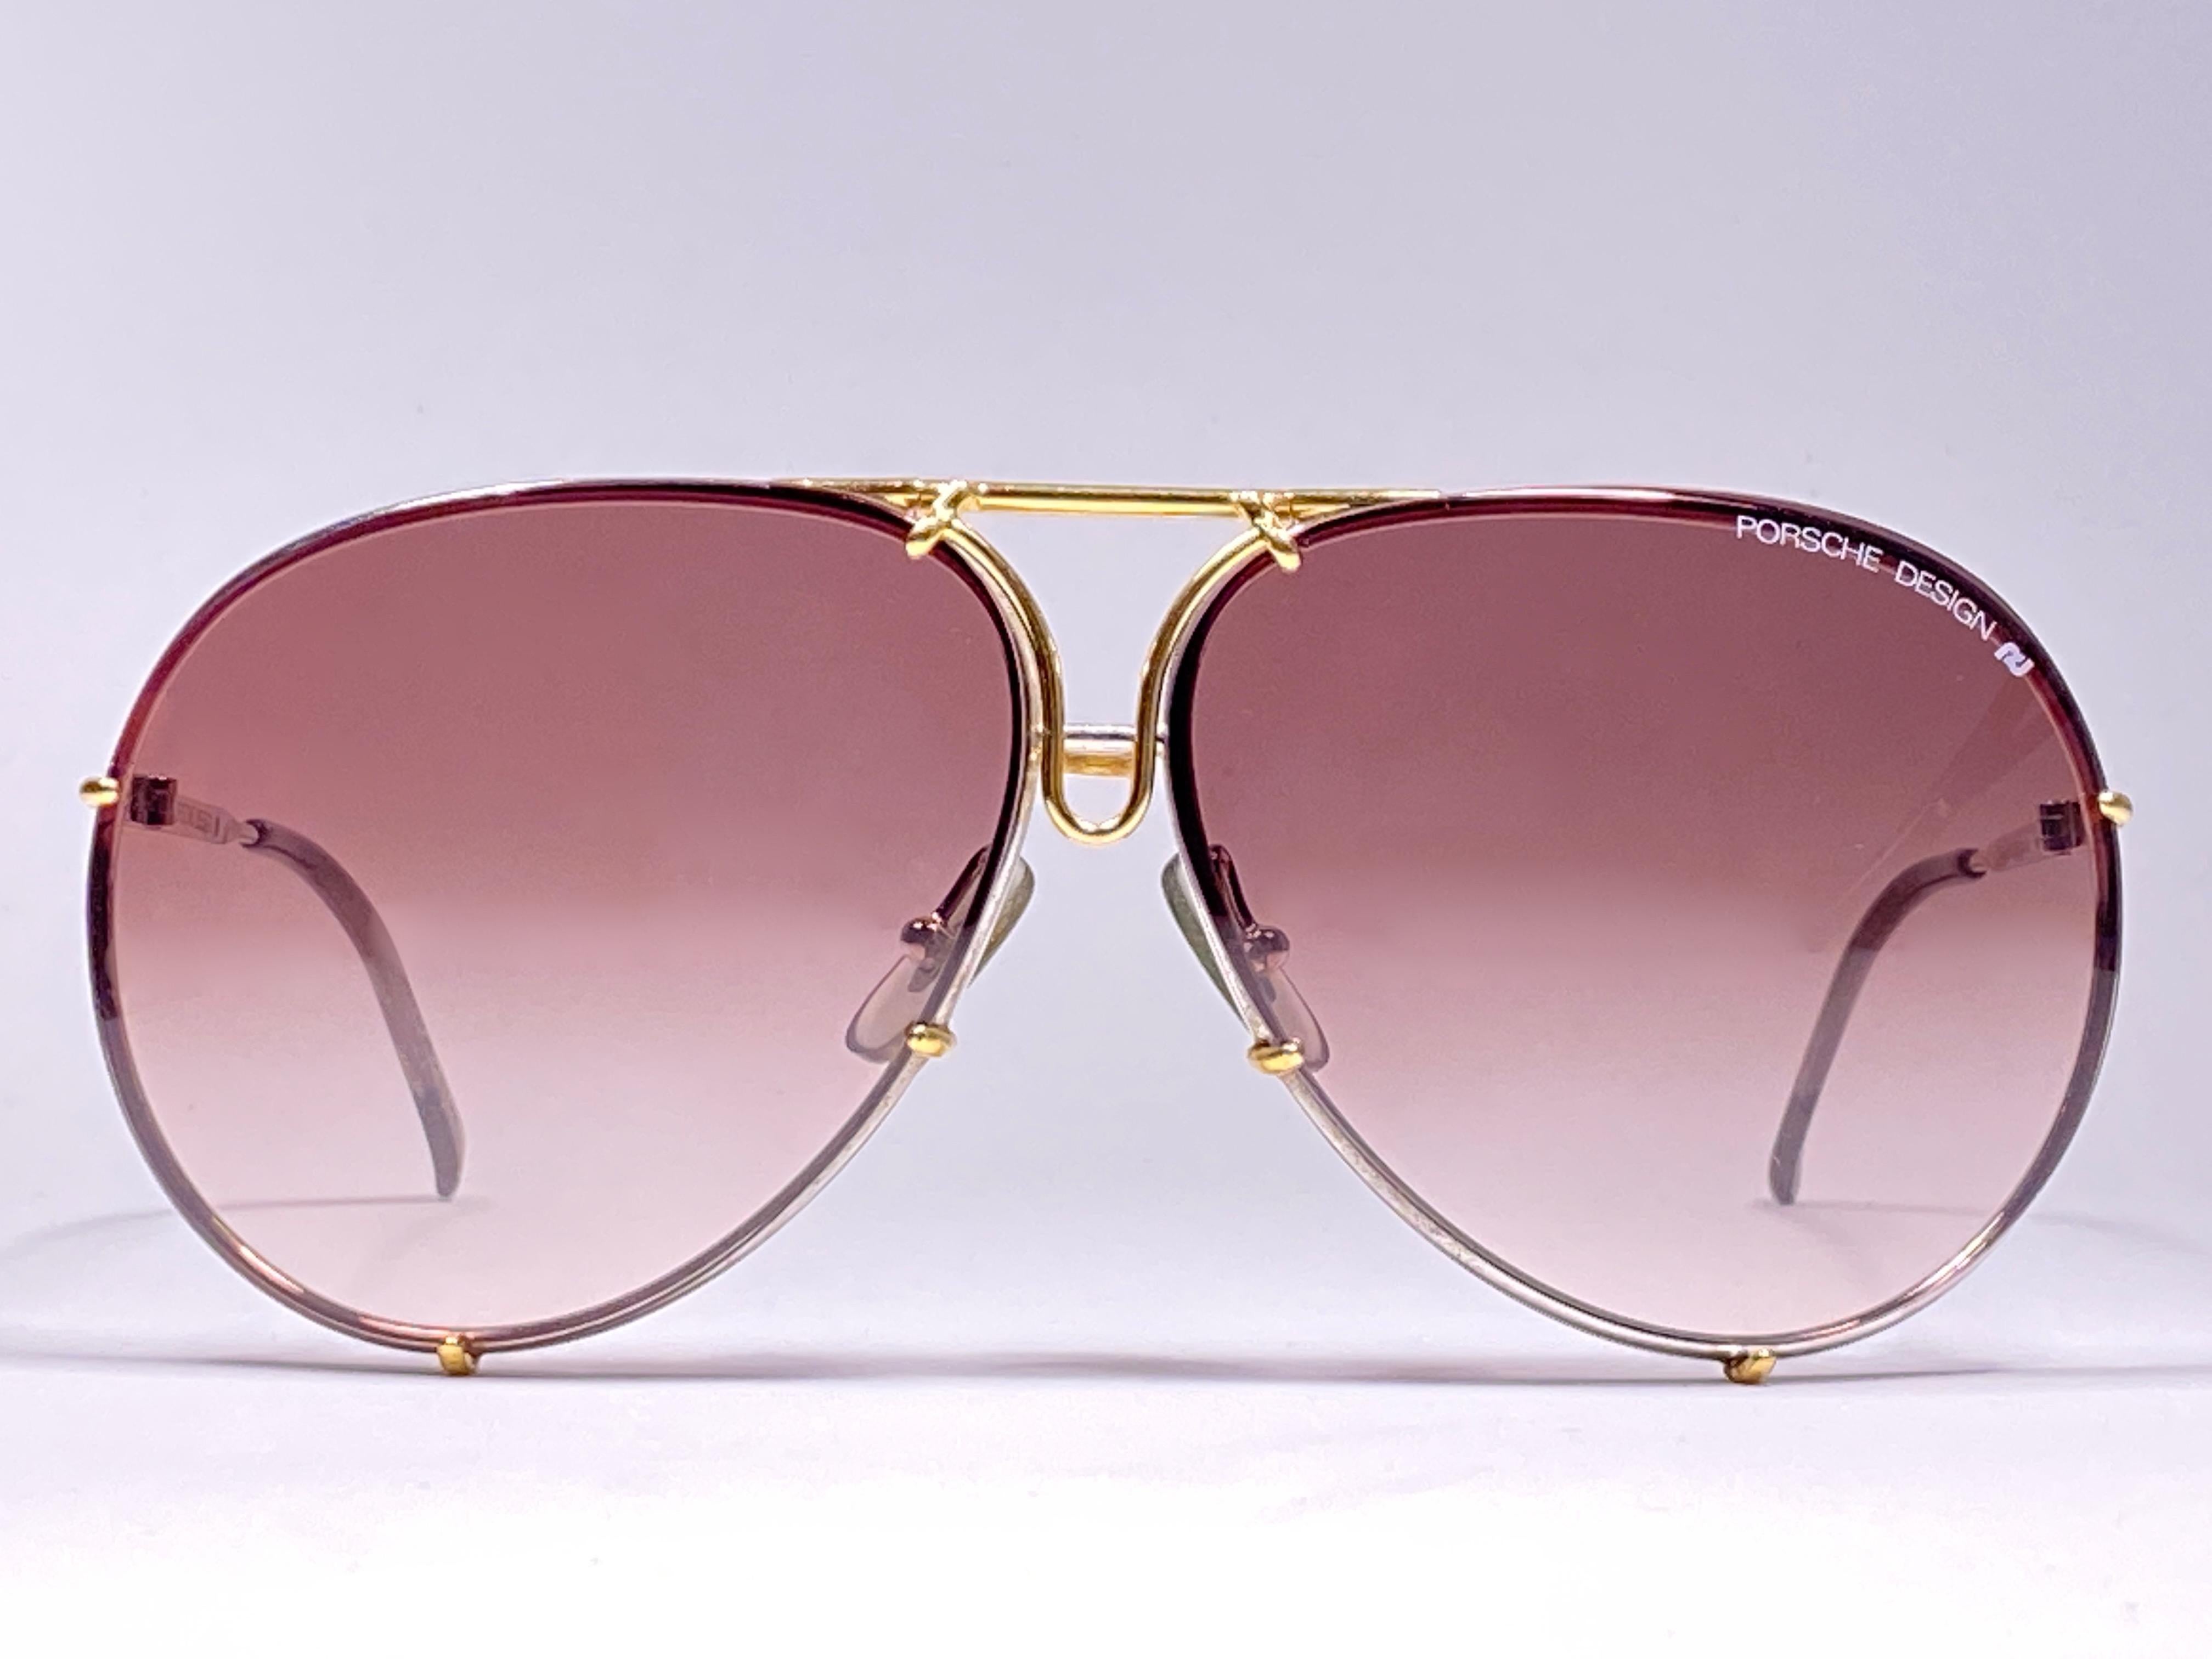 Ultra rare collectors item from the 1980's, 30 years old. 

Porsche Design 5623 gold & silver frame with brown gradient lenses.  Amazing craftsmanship and quality.  No extra pair of lenses for this pair.  This pair has light of wear due to